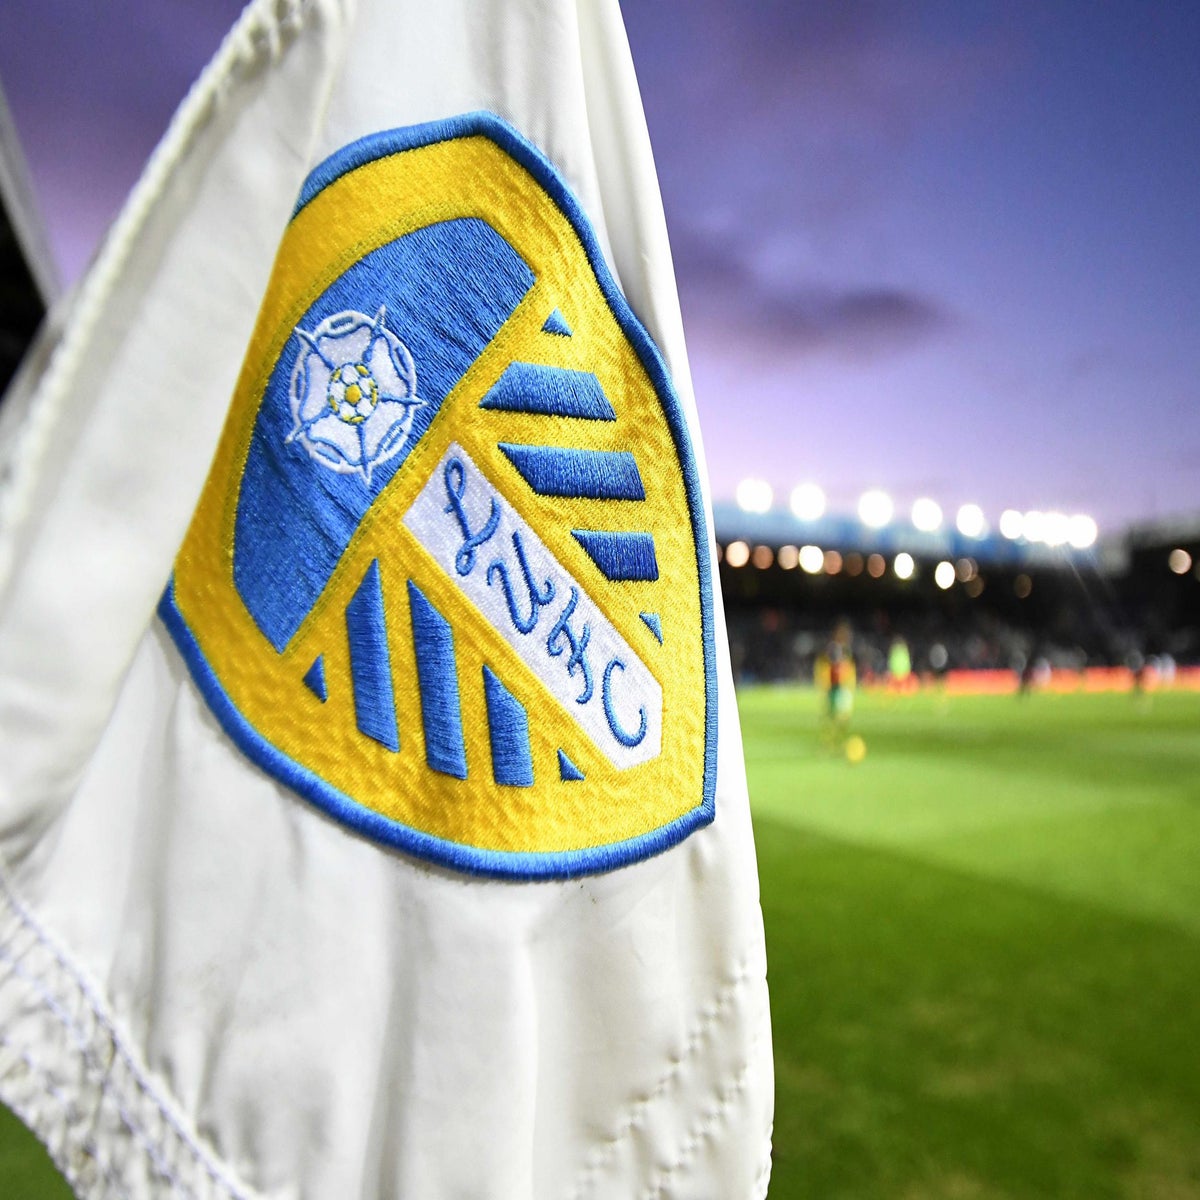 https://static.independent.co.uk/s3fs-public/thumbnails/image/2019/10/14/15/leeds-united.jpg?width=1200&height=1200&fit=crop